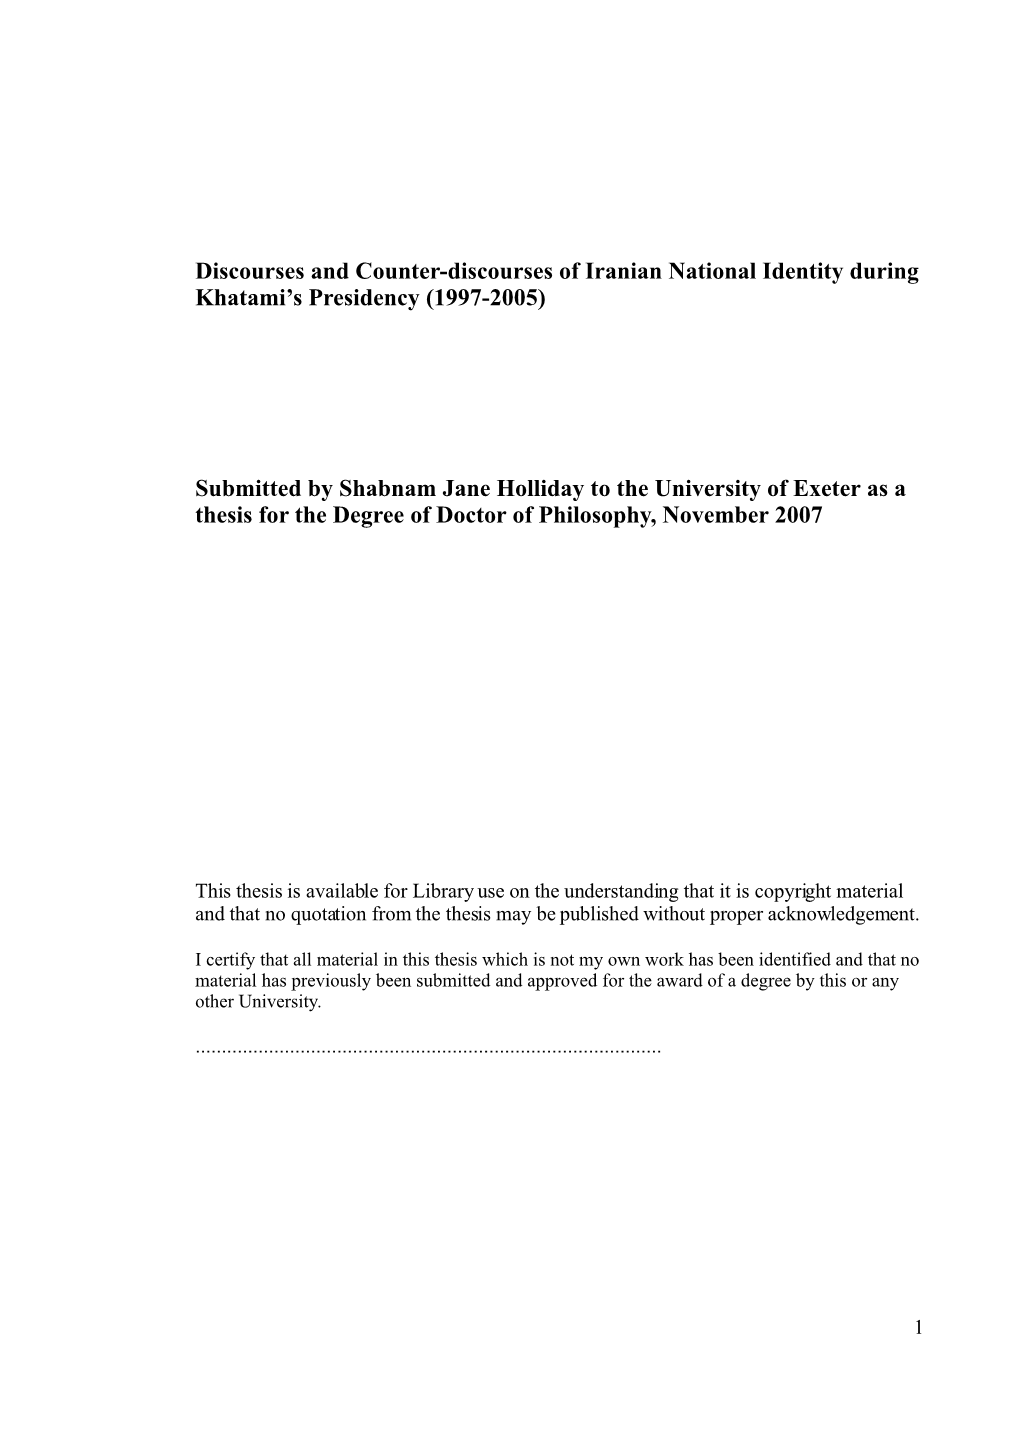 Discourses and Counter-Discourses of Iranian National Identity During Khatami’S Presidency (1997-2005)